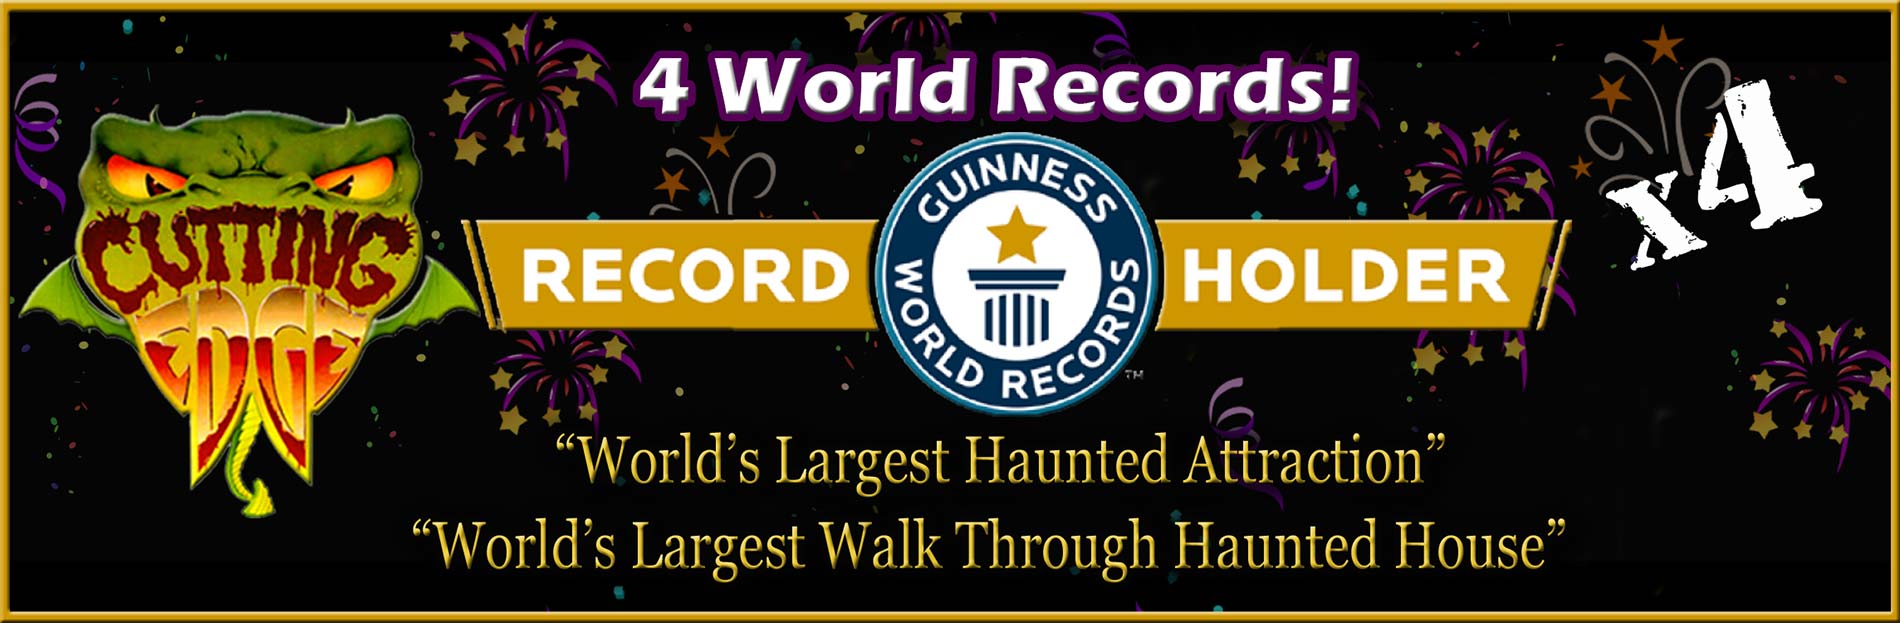 Cutting Edge Haunted House is the Guinness World Record Holder for 'The Longest Walk-Through Haunted House' and the 'Largest Haunted Attraction' in the world!'